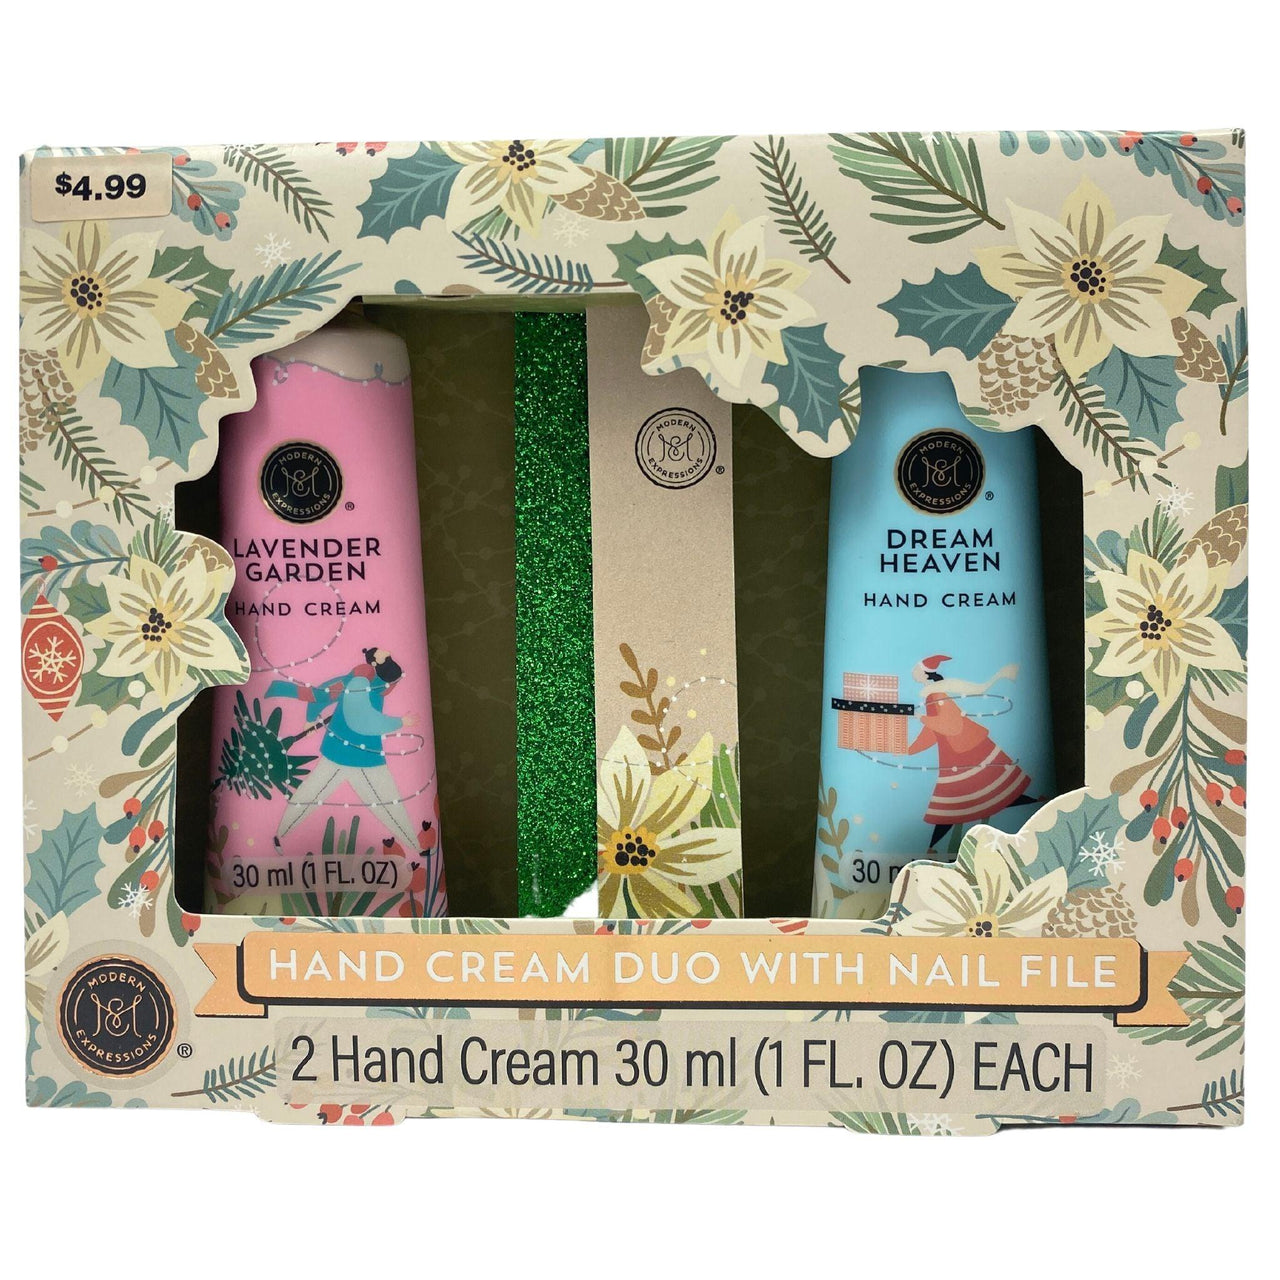 Hand Cream Duo With Nail File 2 Hand Cream 30 ml Each Gift Set (60 Pcs Lot) - Discount Wholesalers Inc